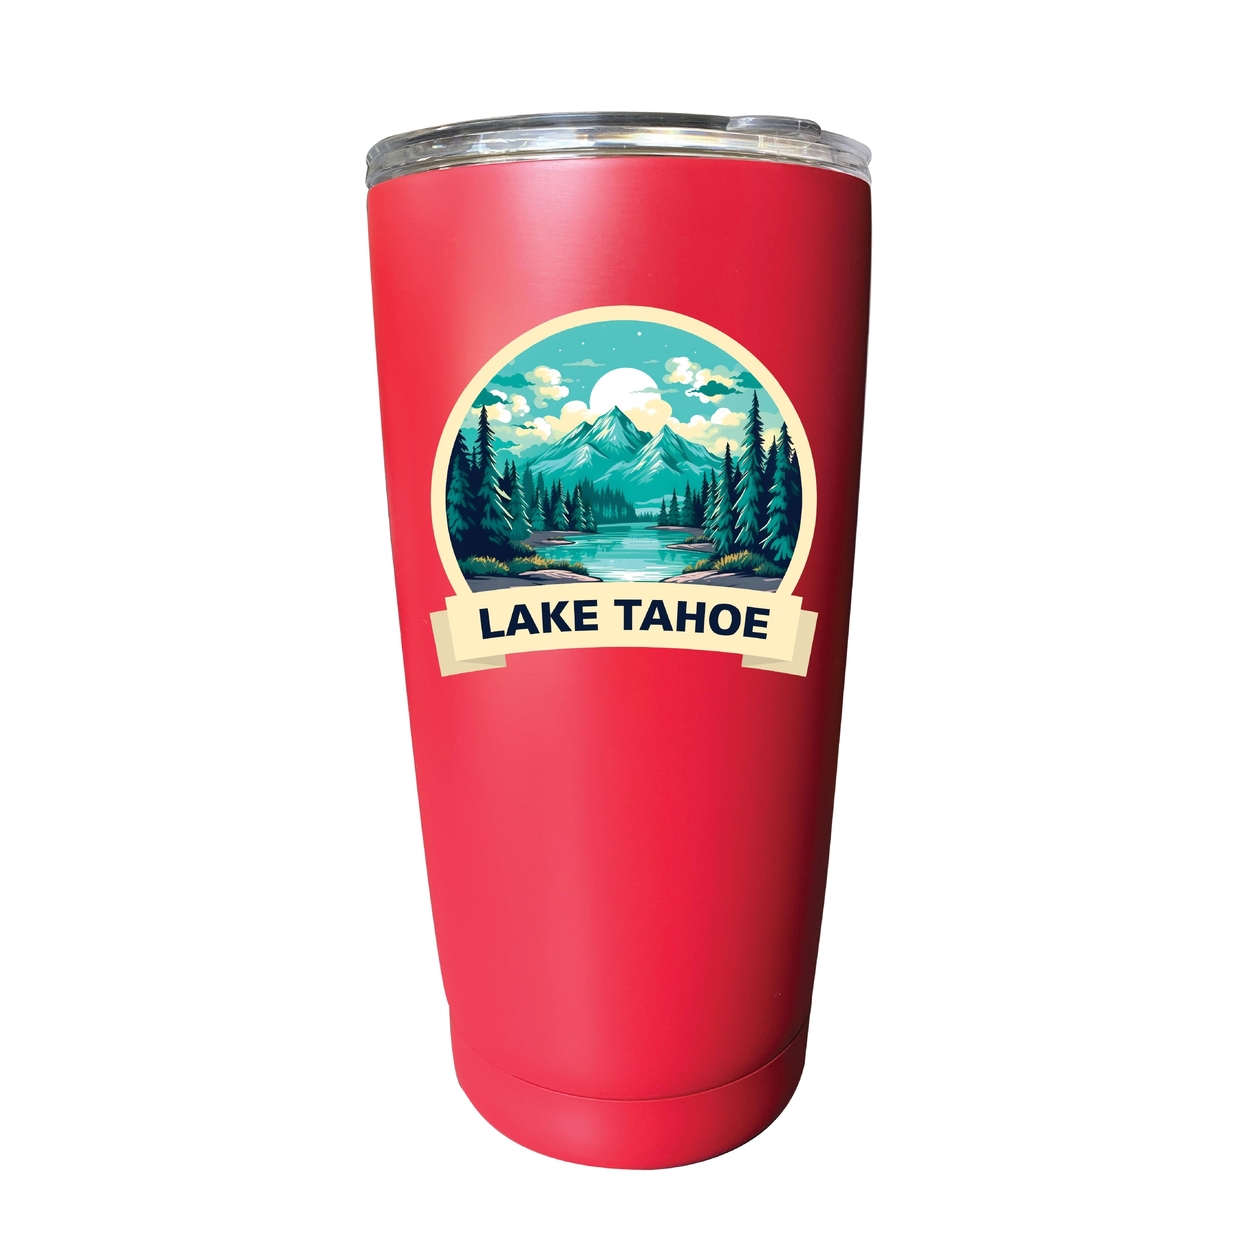 Lake Tahoe California Souvenir 16 Oz Stainless Steel Insulated Tumbler - Red,,4-Pack